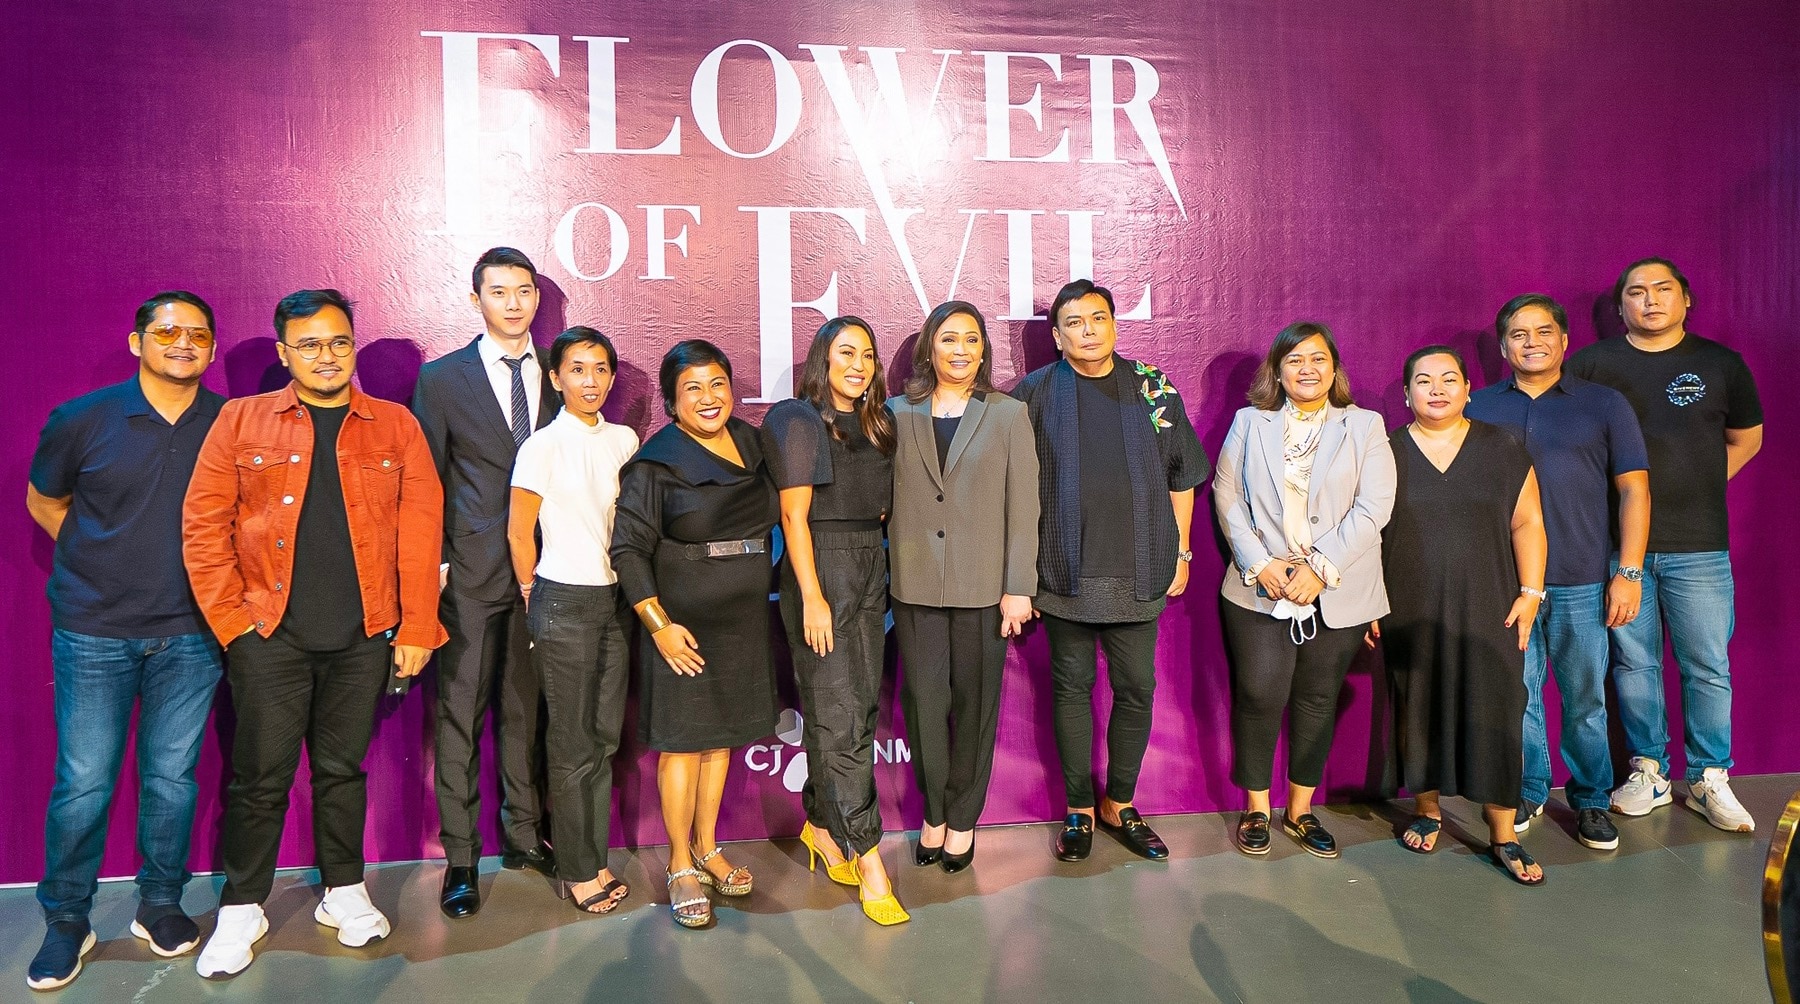 Viu and ABS CBN executives with the directors and team of Flower of Evil